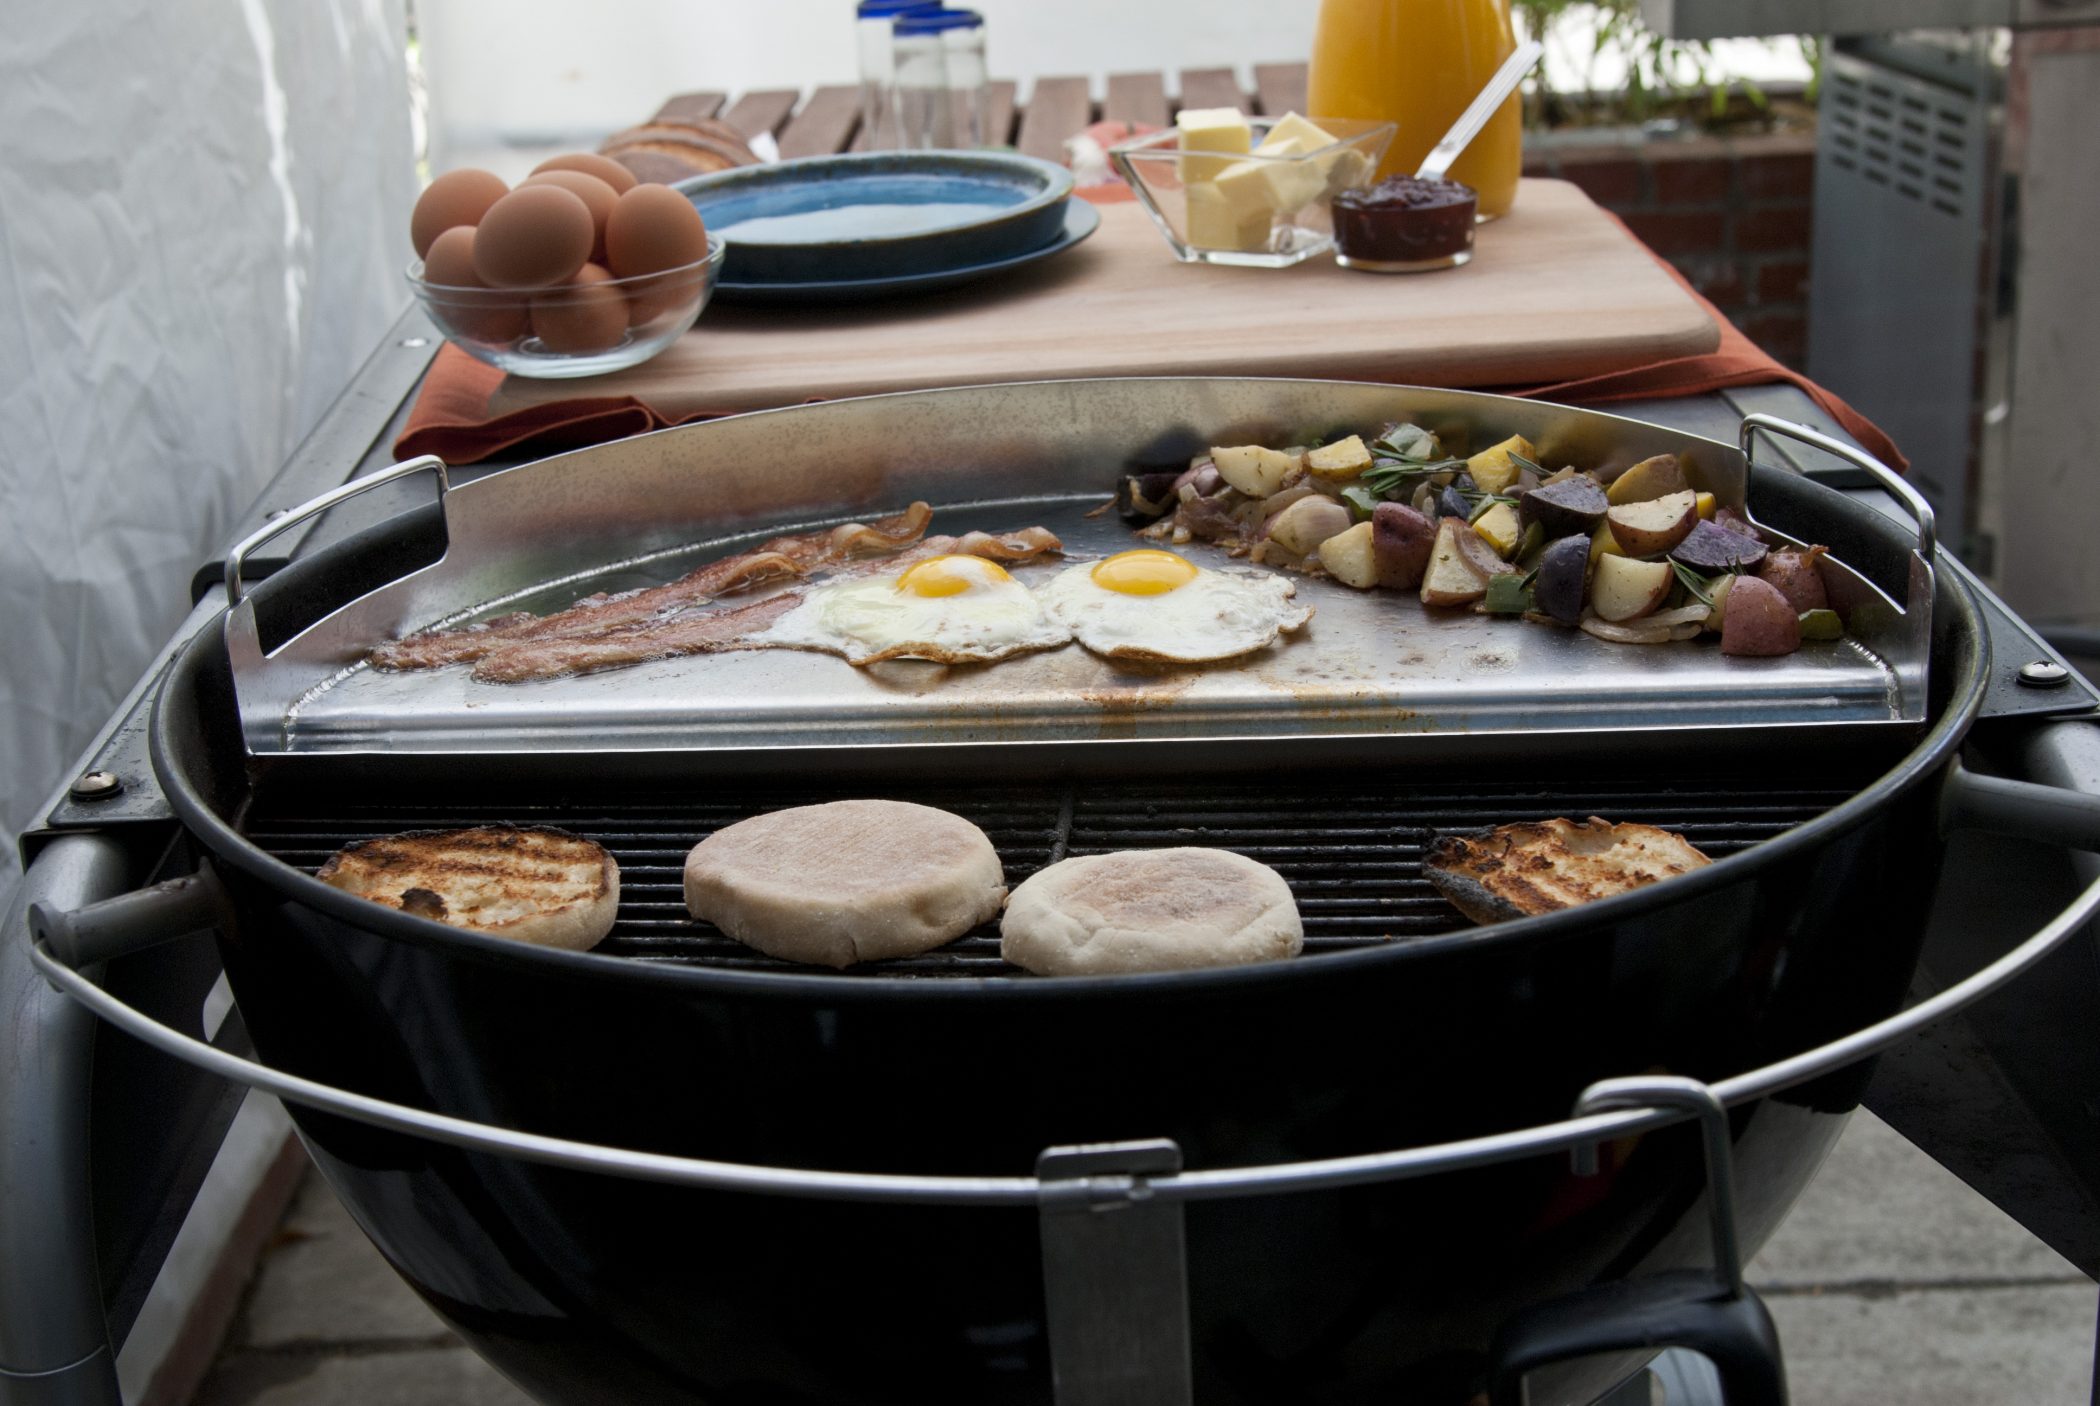 How To Make Breakfast On The Grill, Grillaholics